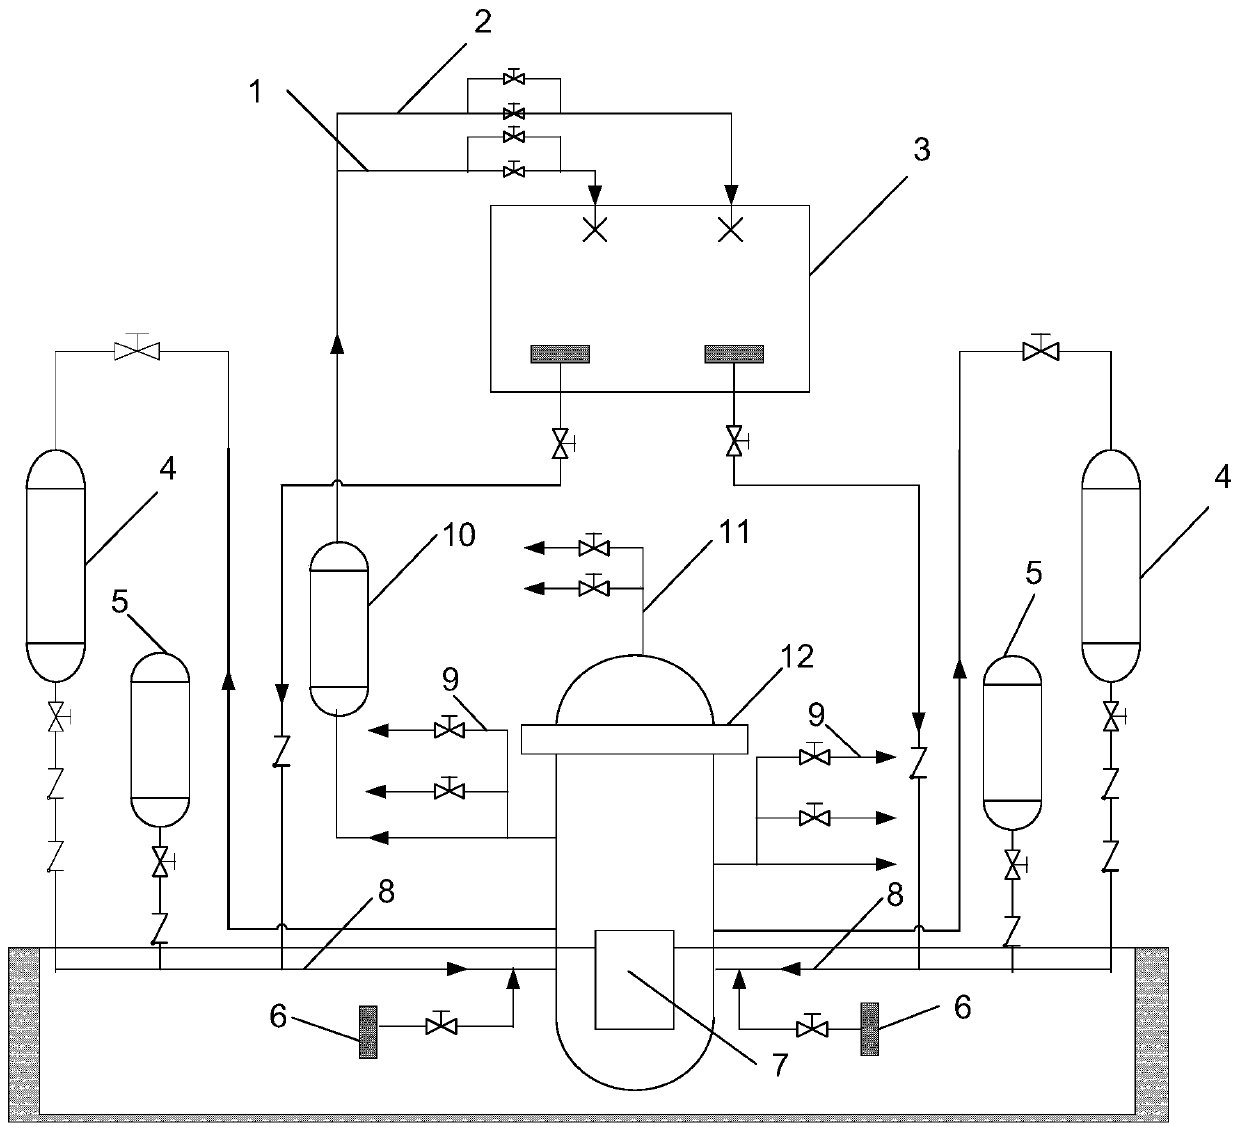 Long-term cooling system for loss-of-coolant accident during isolation failure of modular small reactor containment